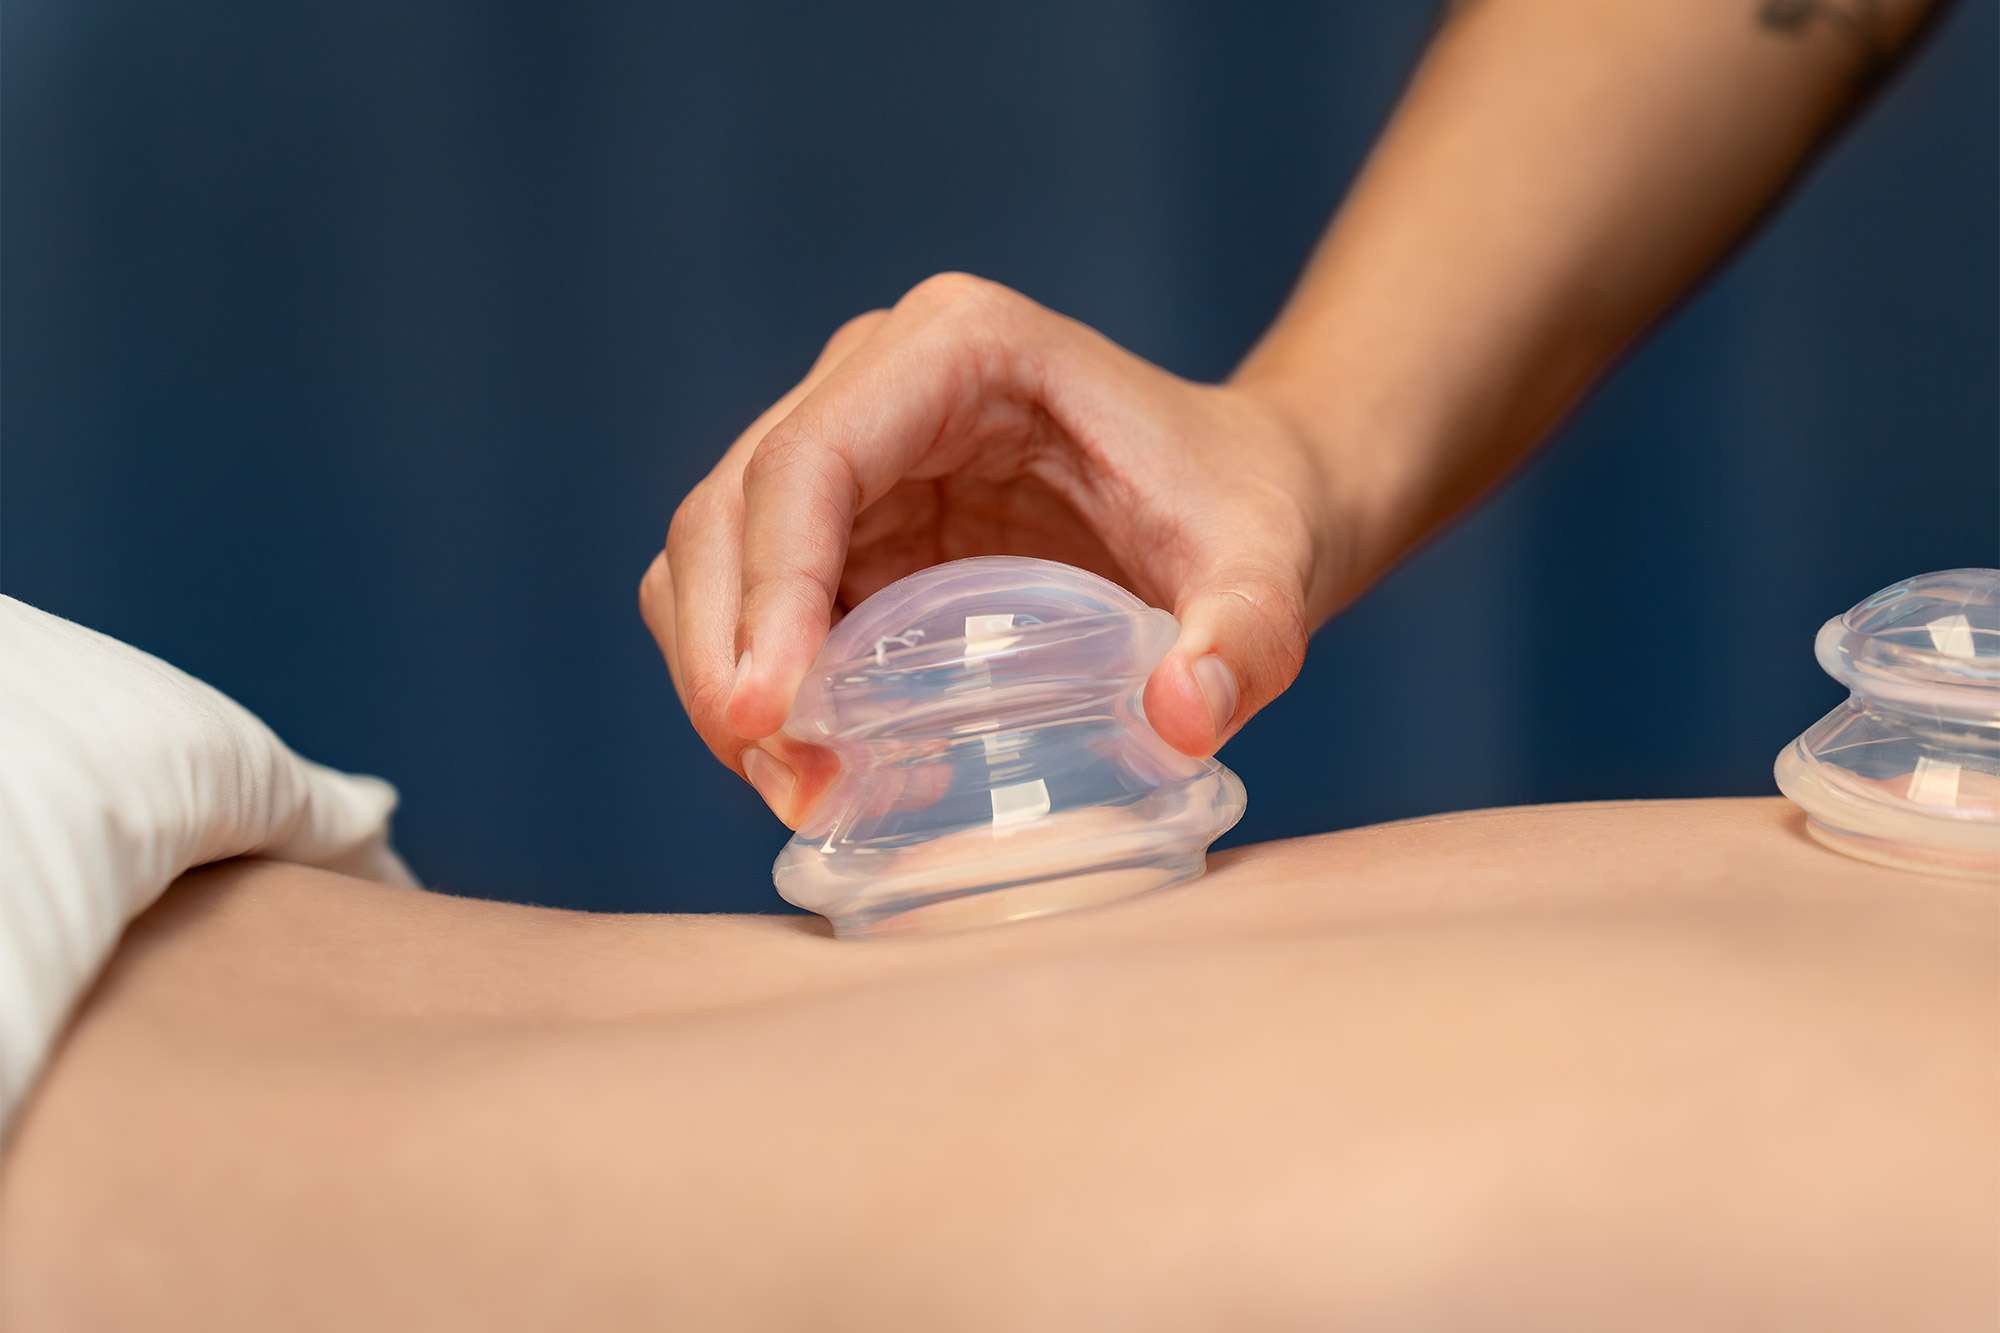 A massage therapist is using suction cups for Cupping therapy on a patient.